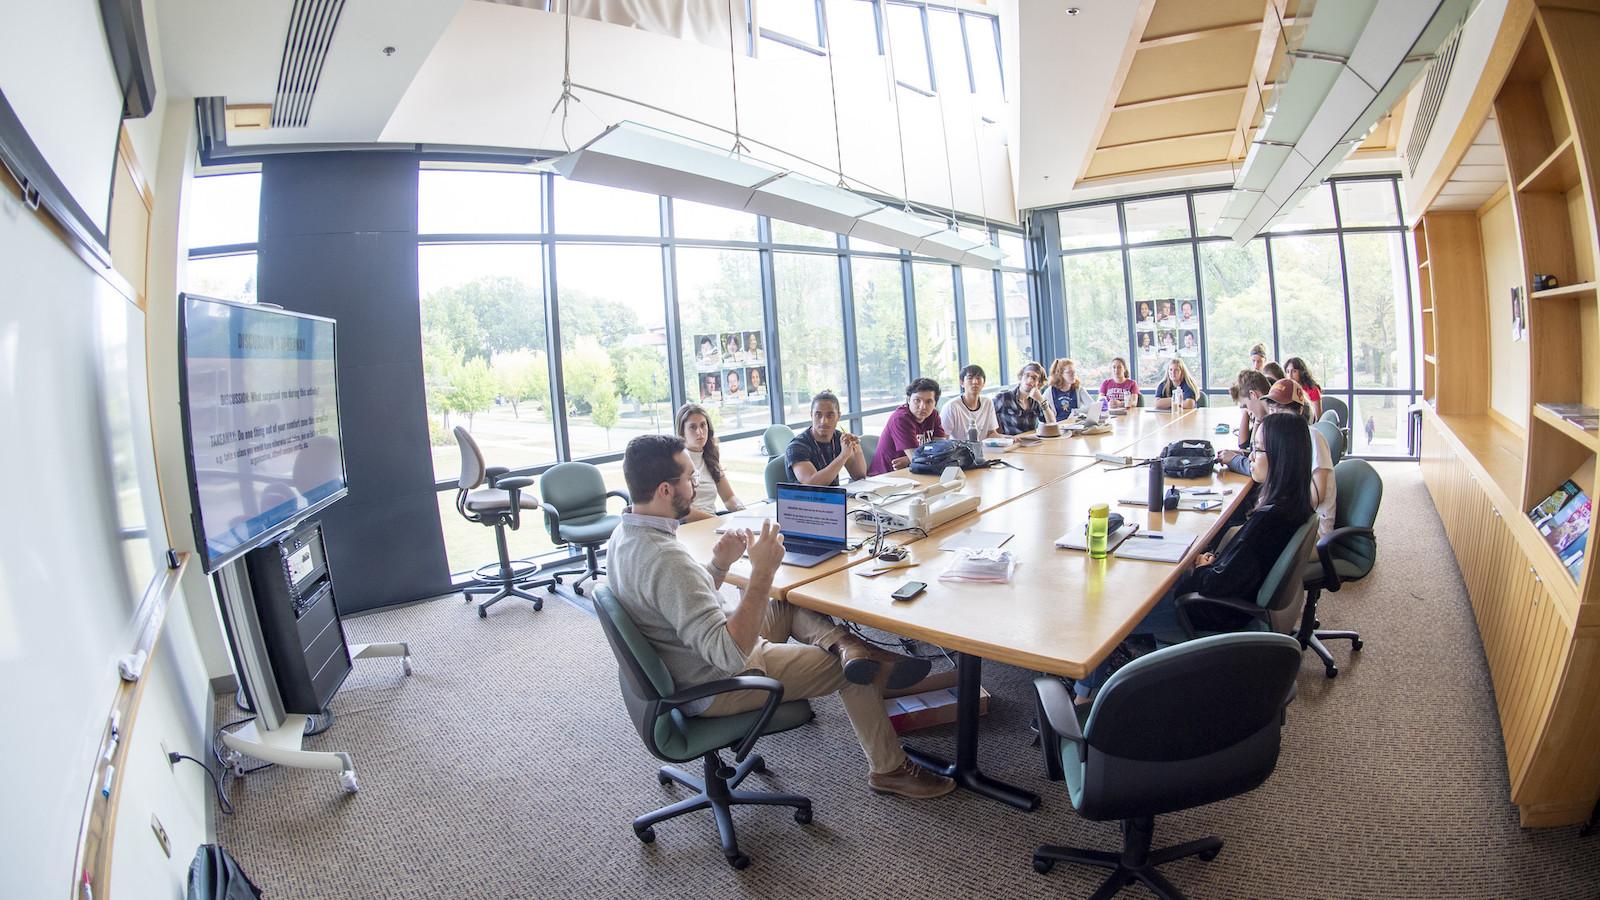 Discussion group around a large conference table.